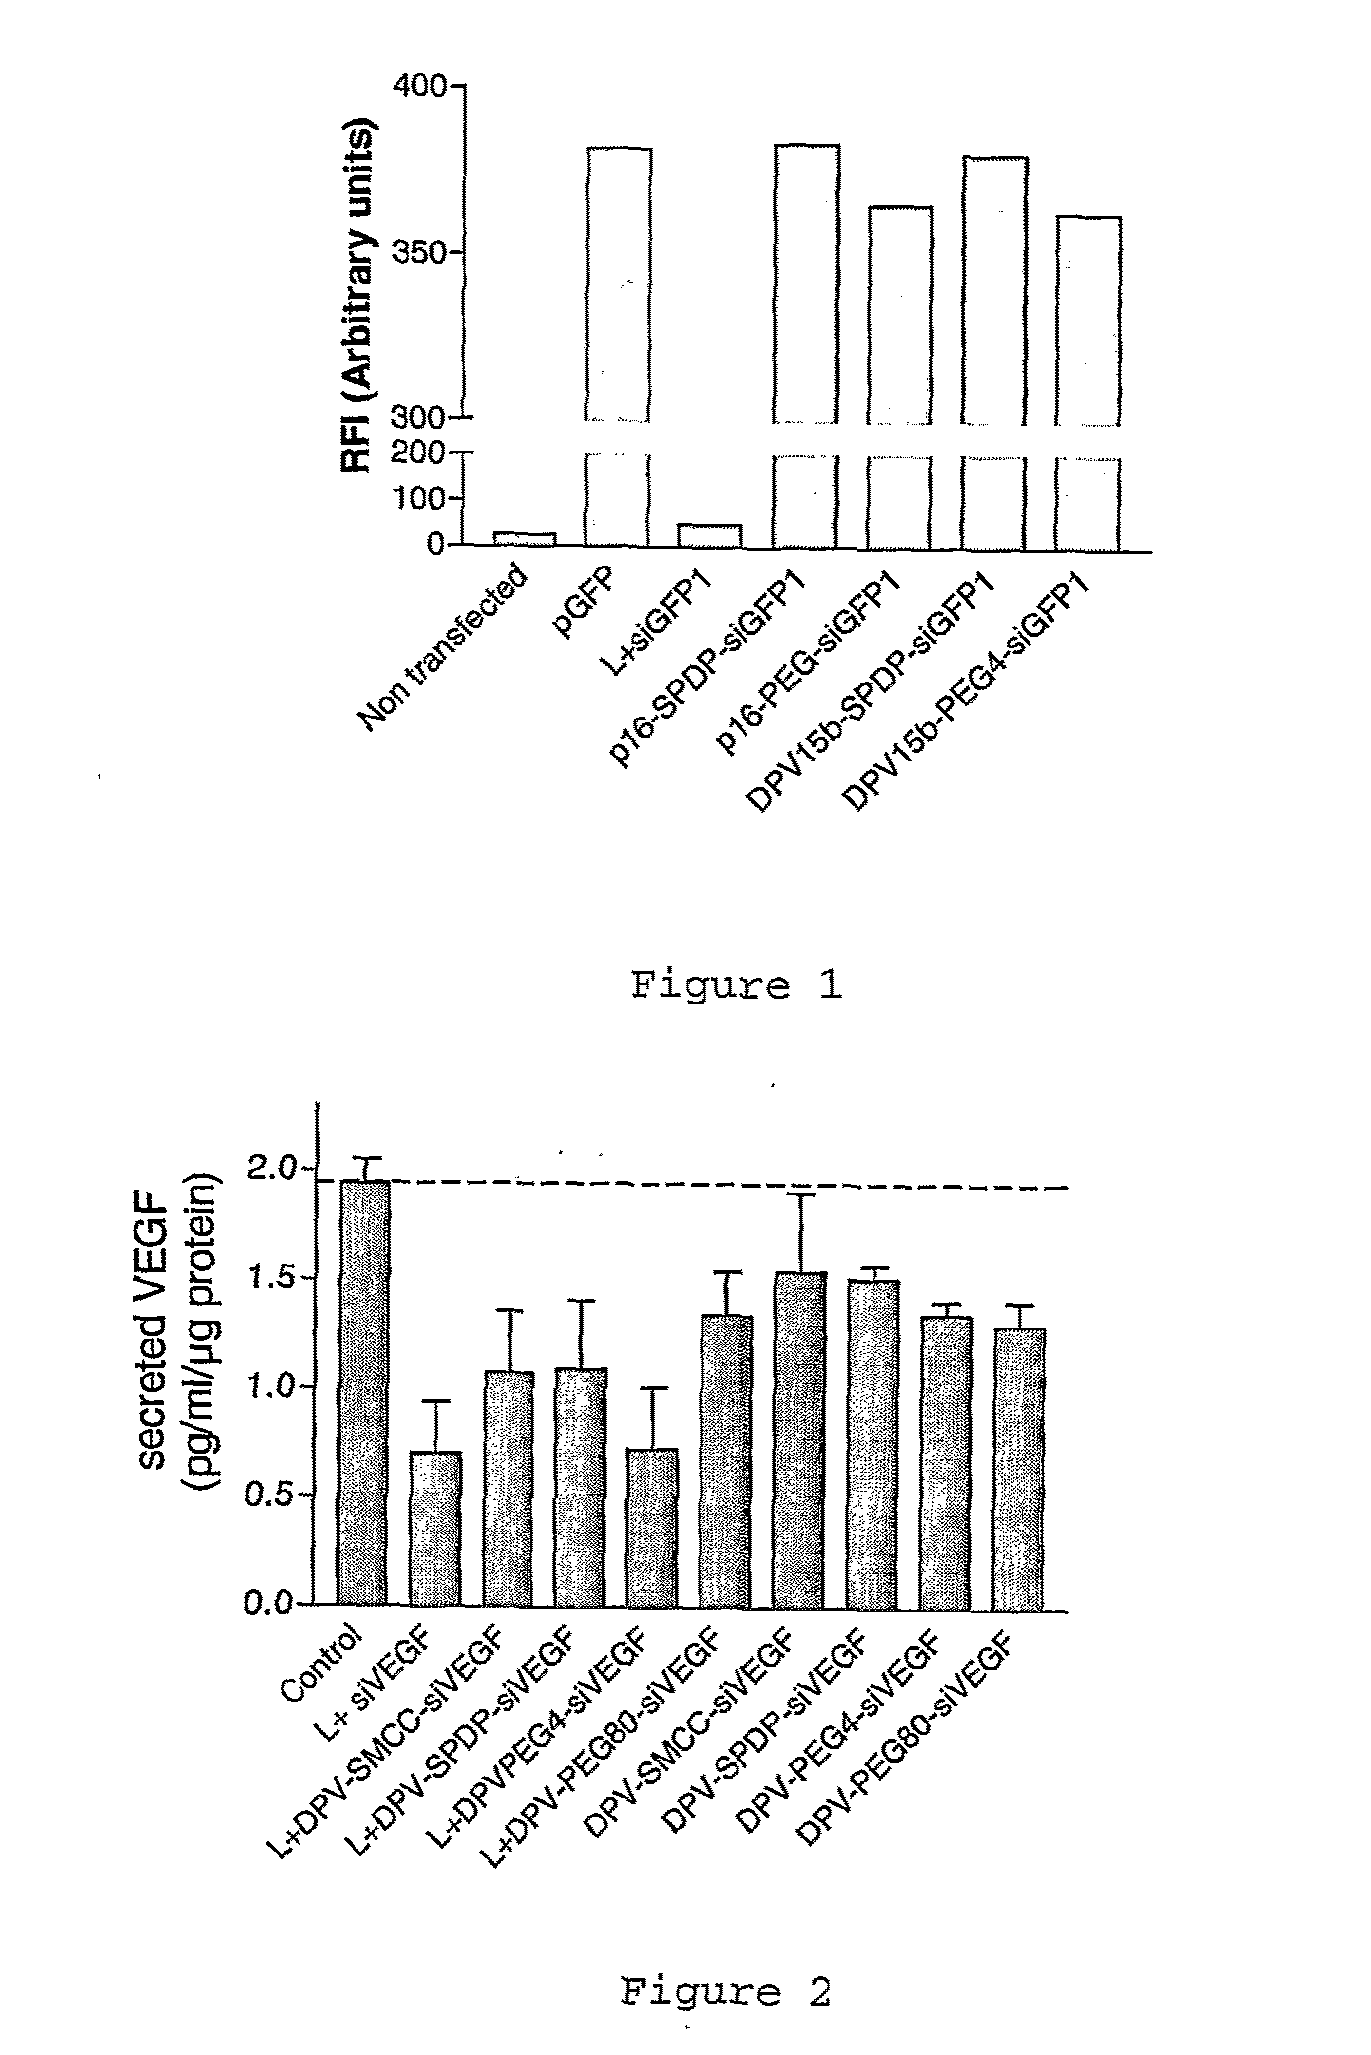 Cell Penetrating Peptide Conjugates for Delivering of Nucleic Acids into a Cell